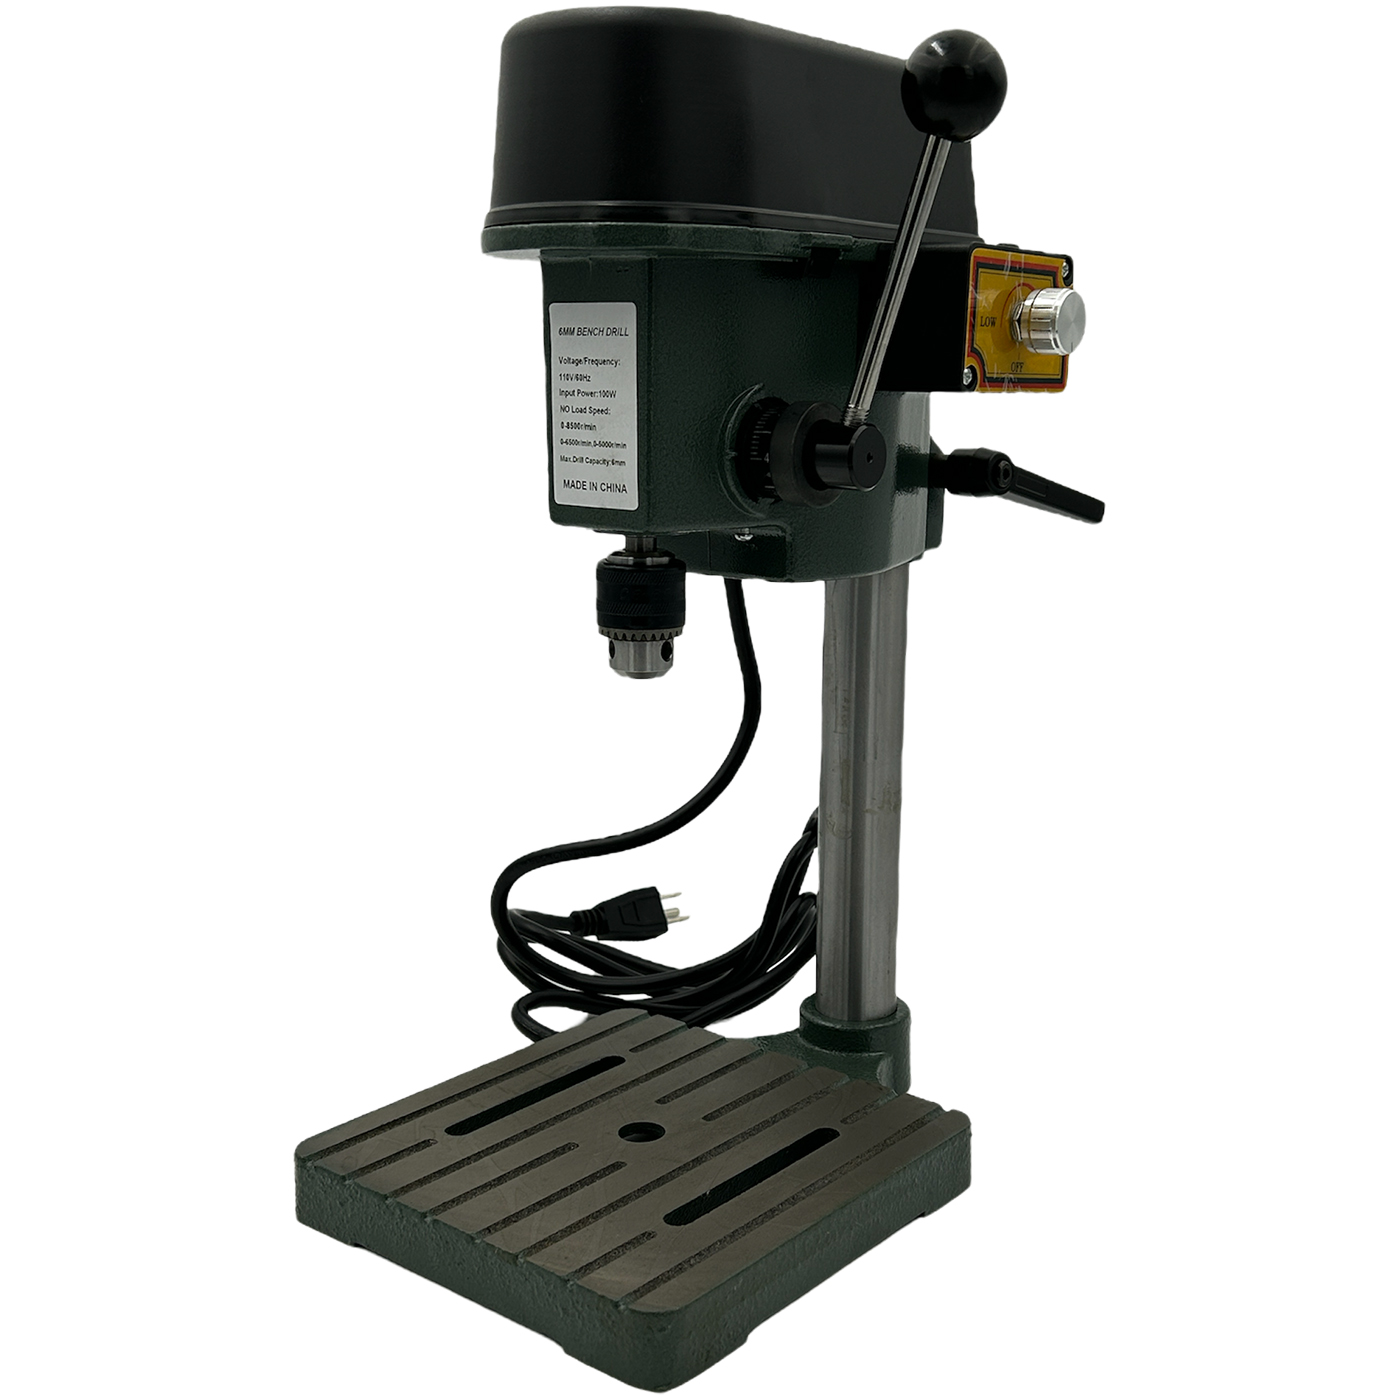 Variable Speed Mini Bench Drill Press 3 Speed - JETS INC. - Jewelers  Equipment Tools and Supplies